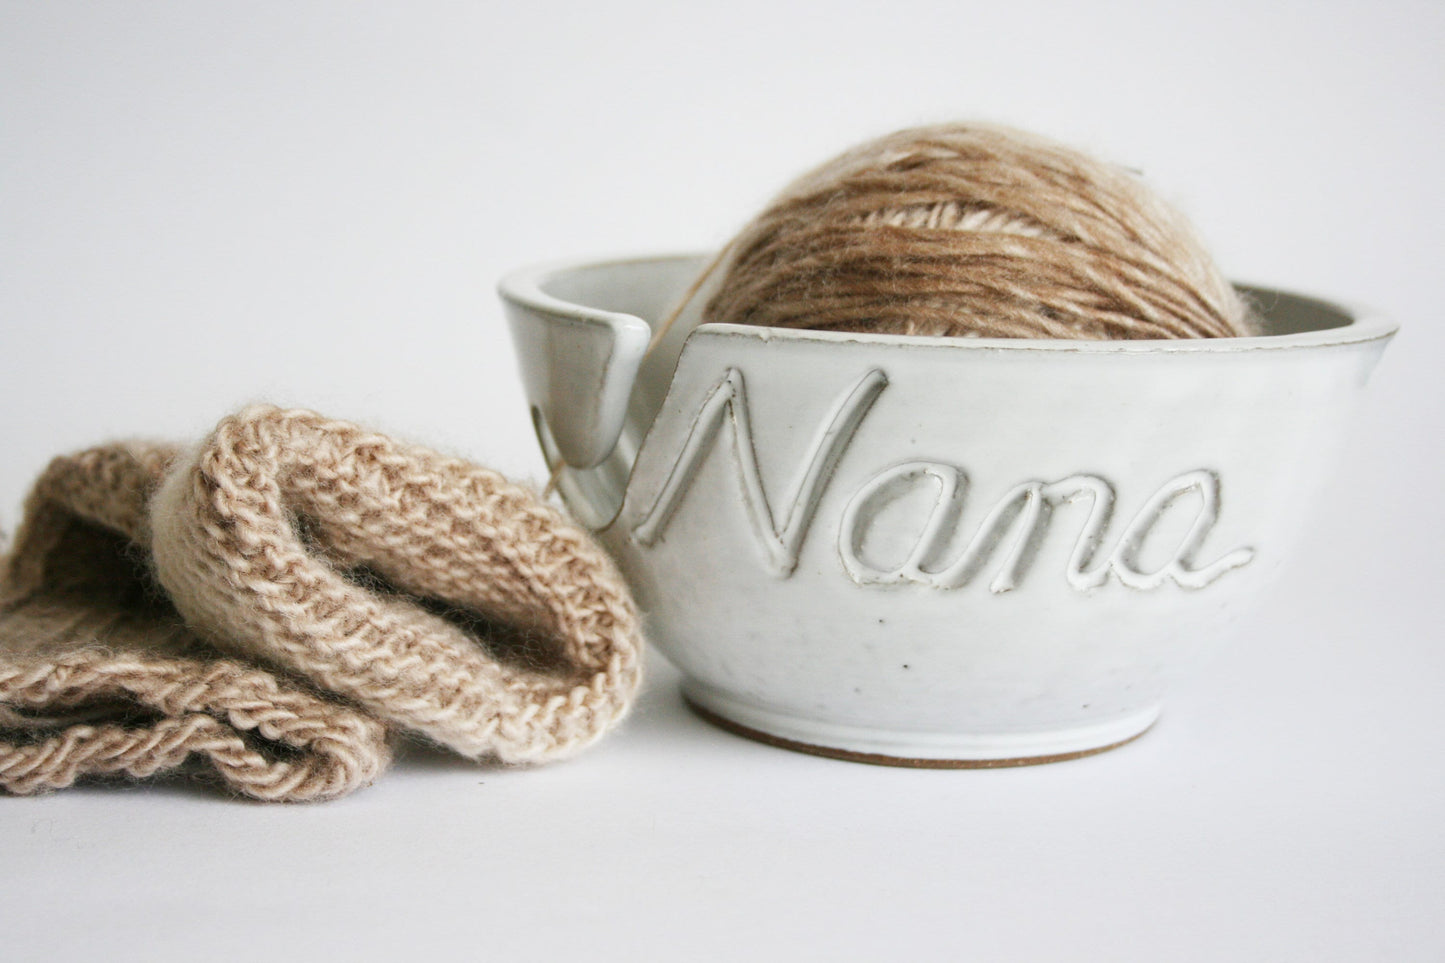 Personalized Custom Print Name Yarn Bowl Blue Engraved Finish Customized Ceramic Pottery Holder Knit Gifts for Knitters Nana MADE TO ORDER